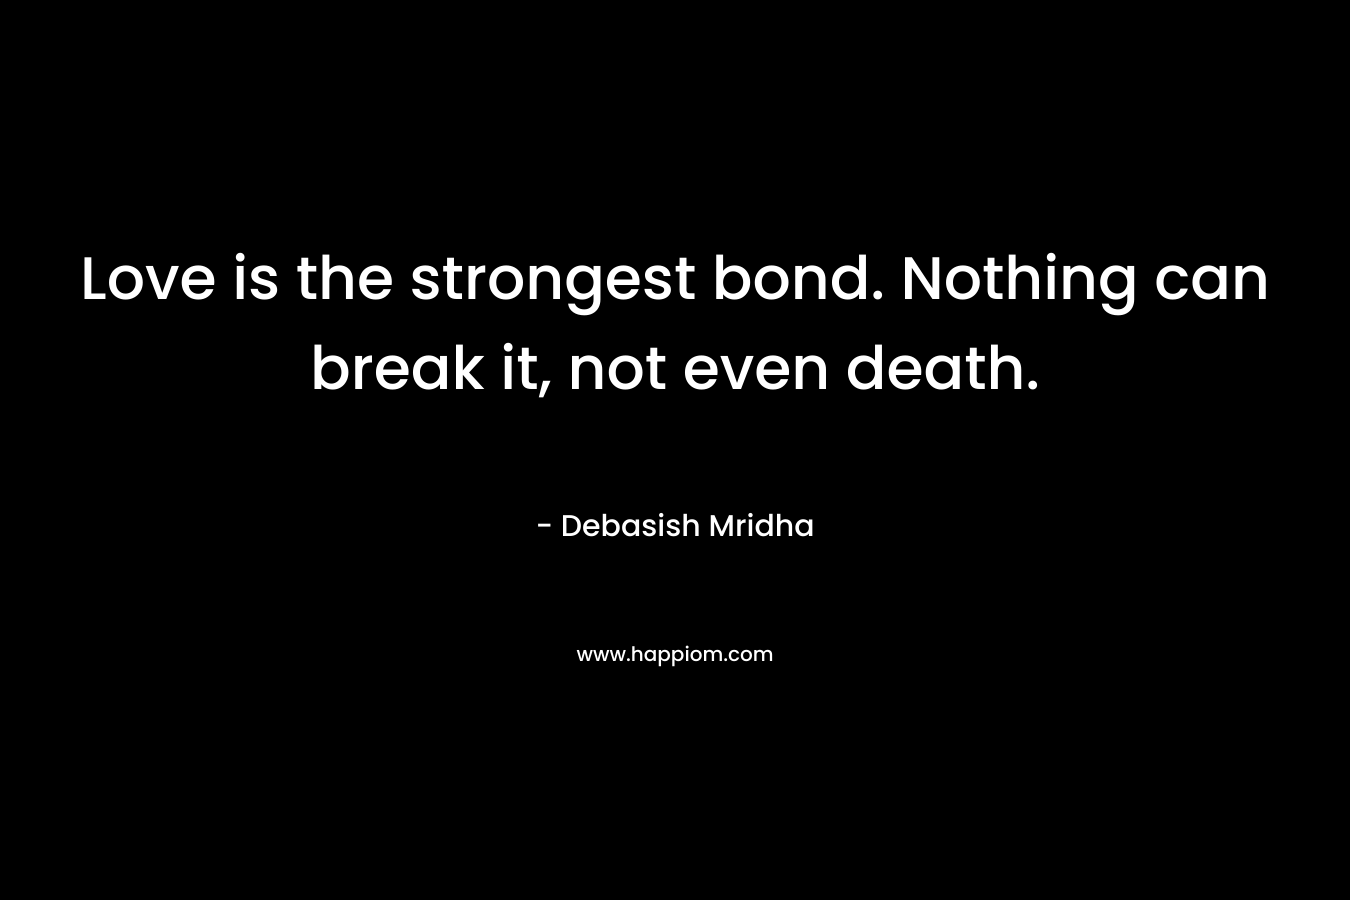 Love is the strongest bond. Nothing can break it, not even death.